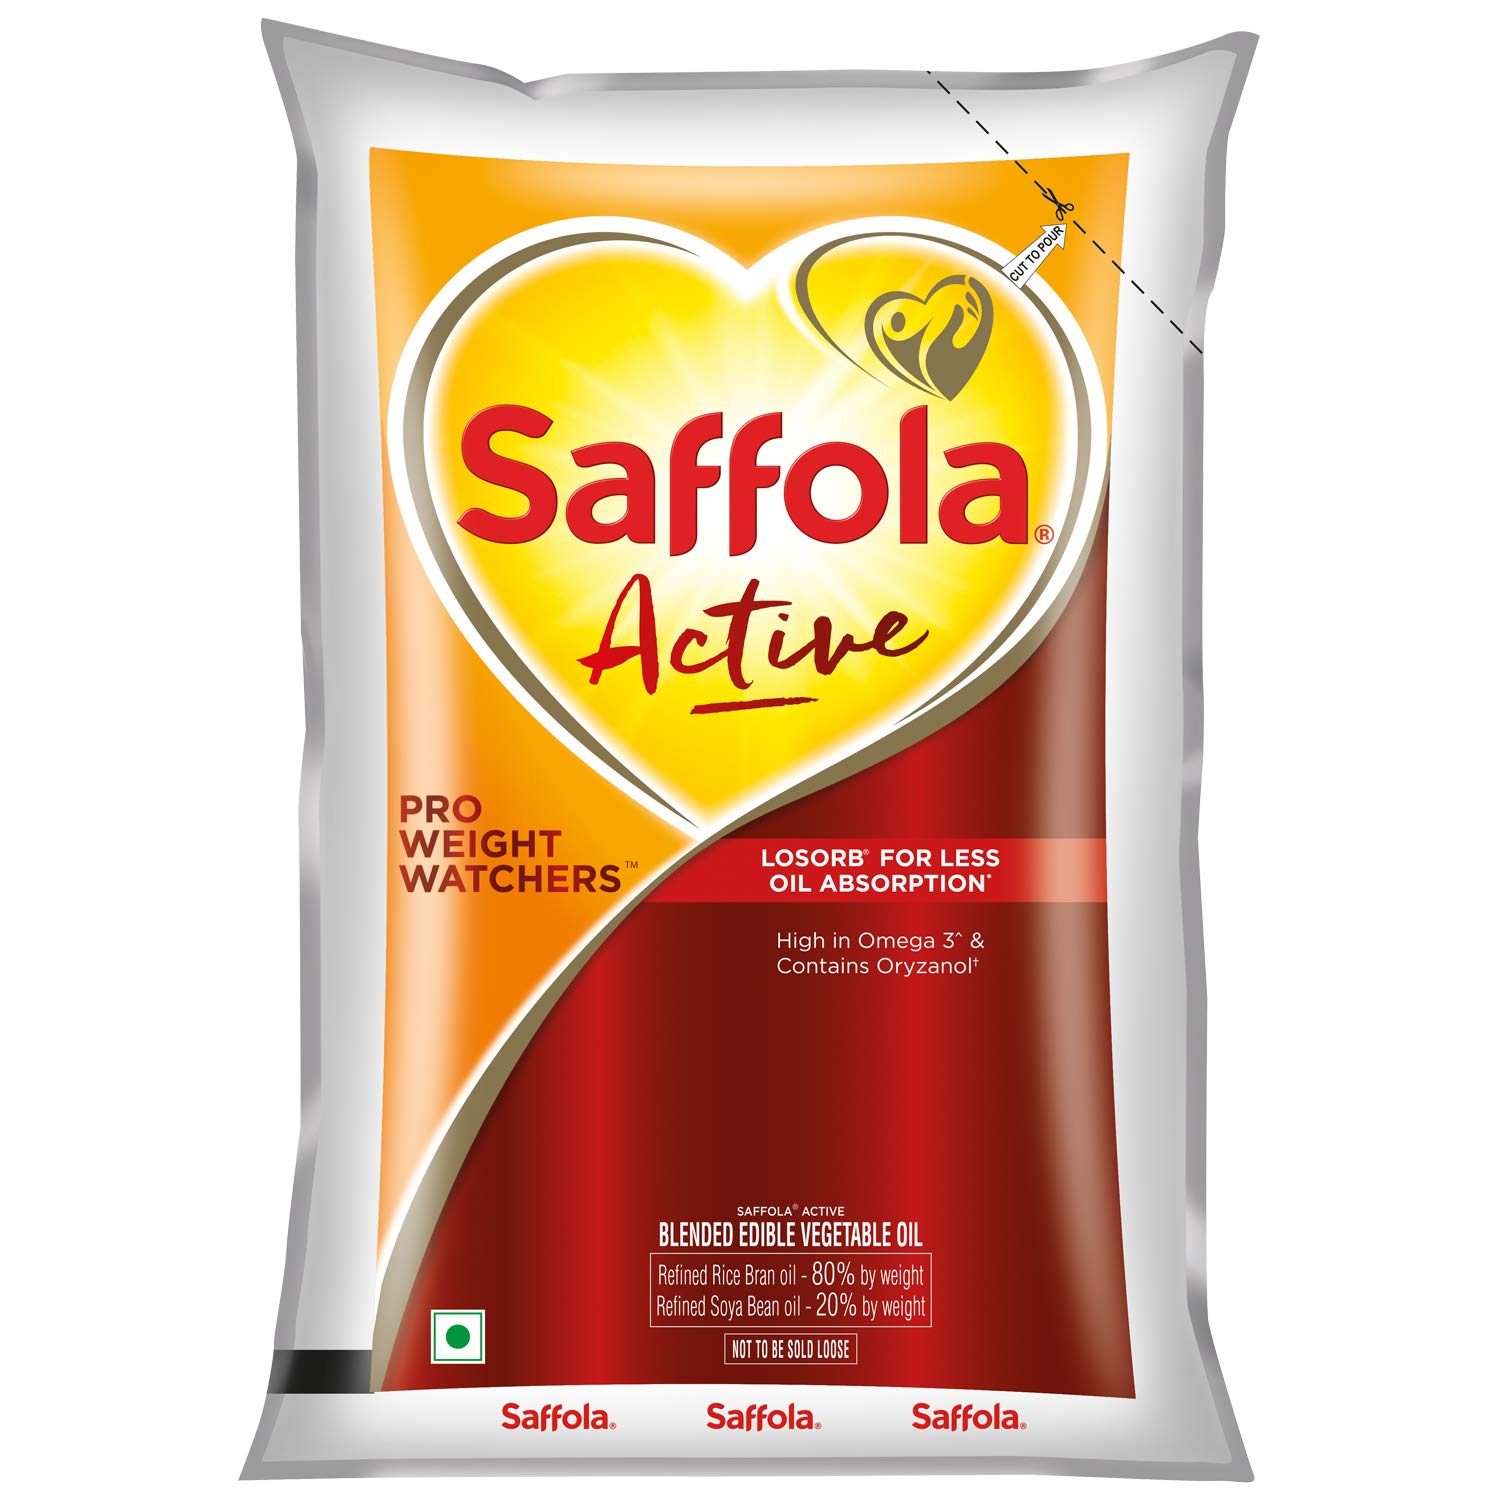 Saffola Active, Pro Weight Watchers Edible Oil, Pouch, 1 L